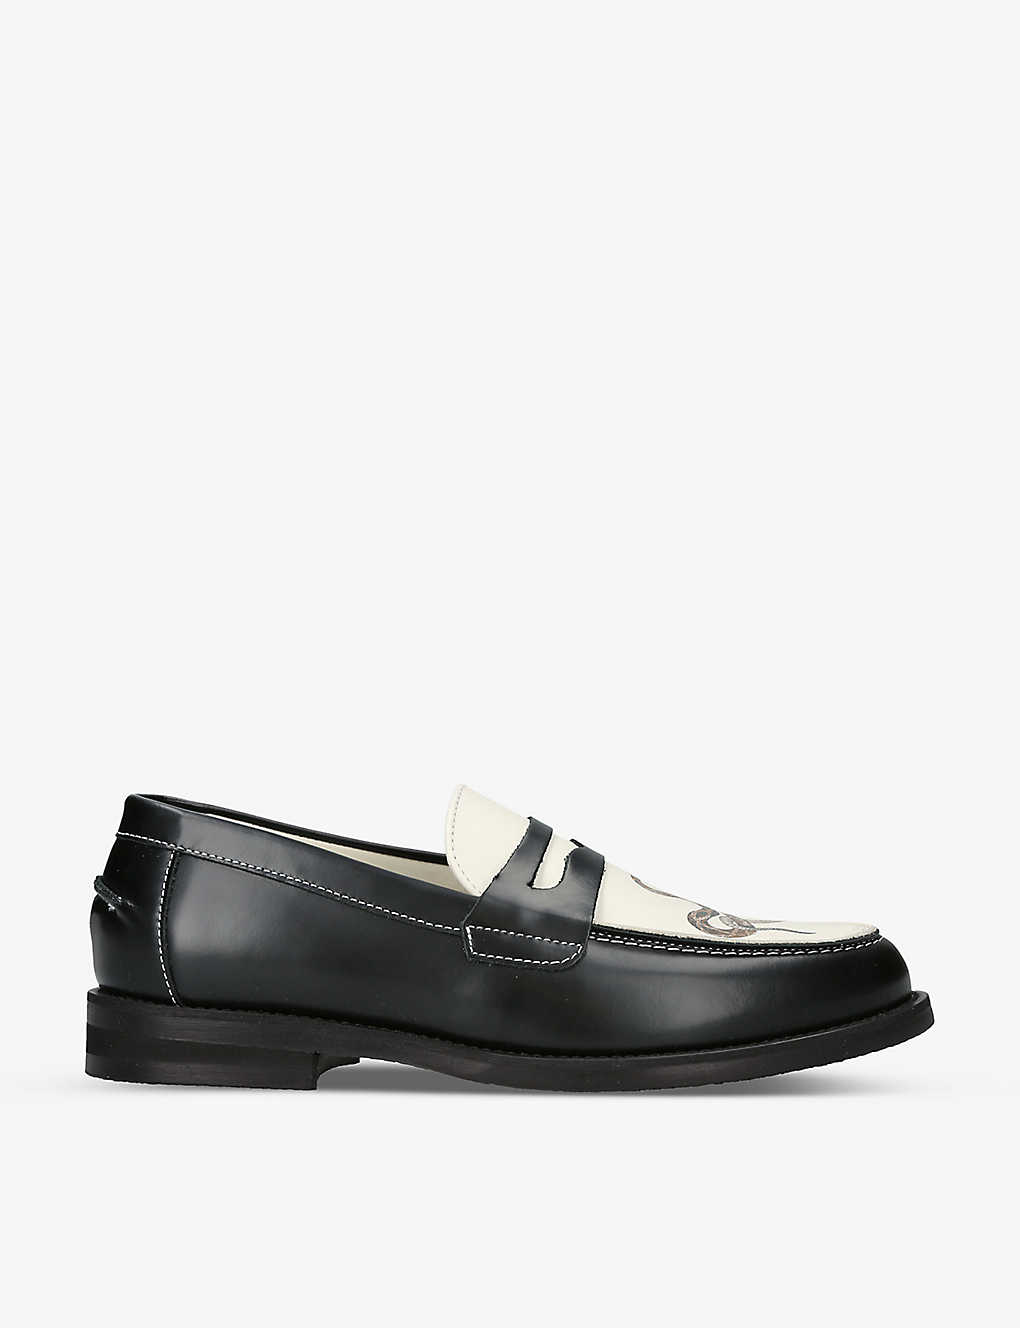 Duke & Dexter Wilde Snake-graphic Print Leather Penny Loafers In Blk/white